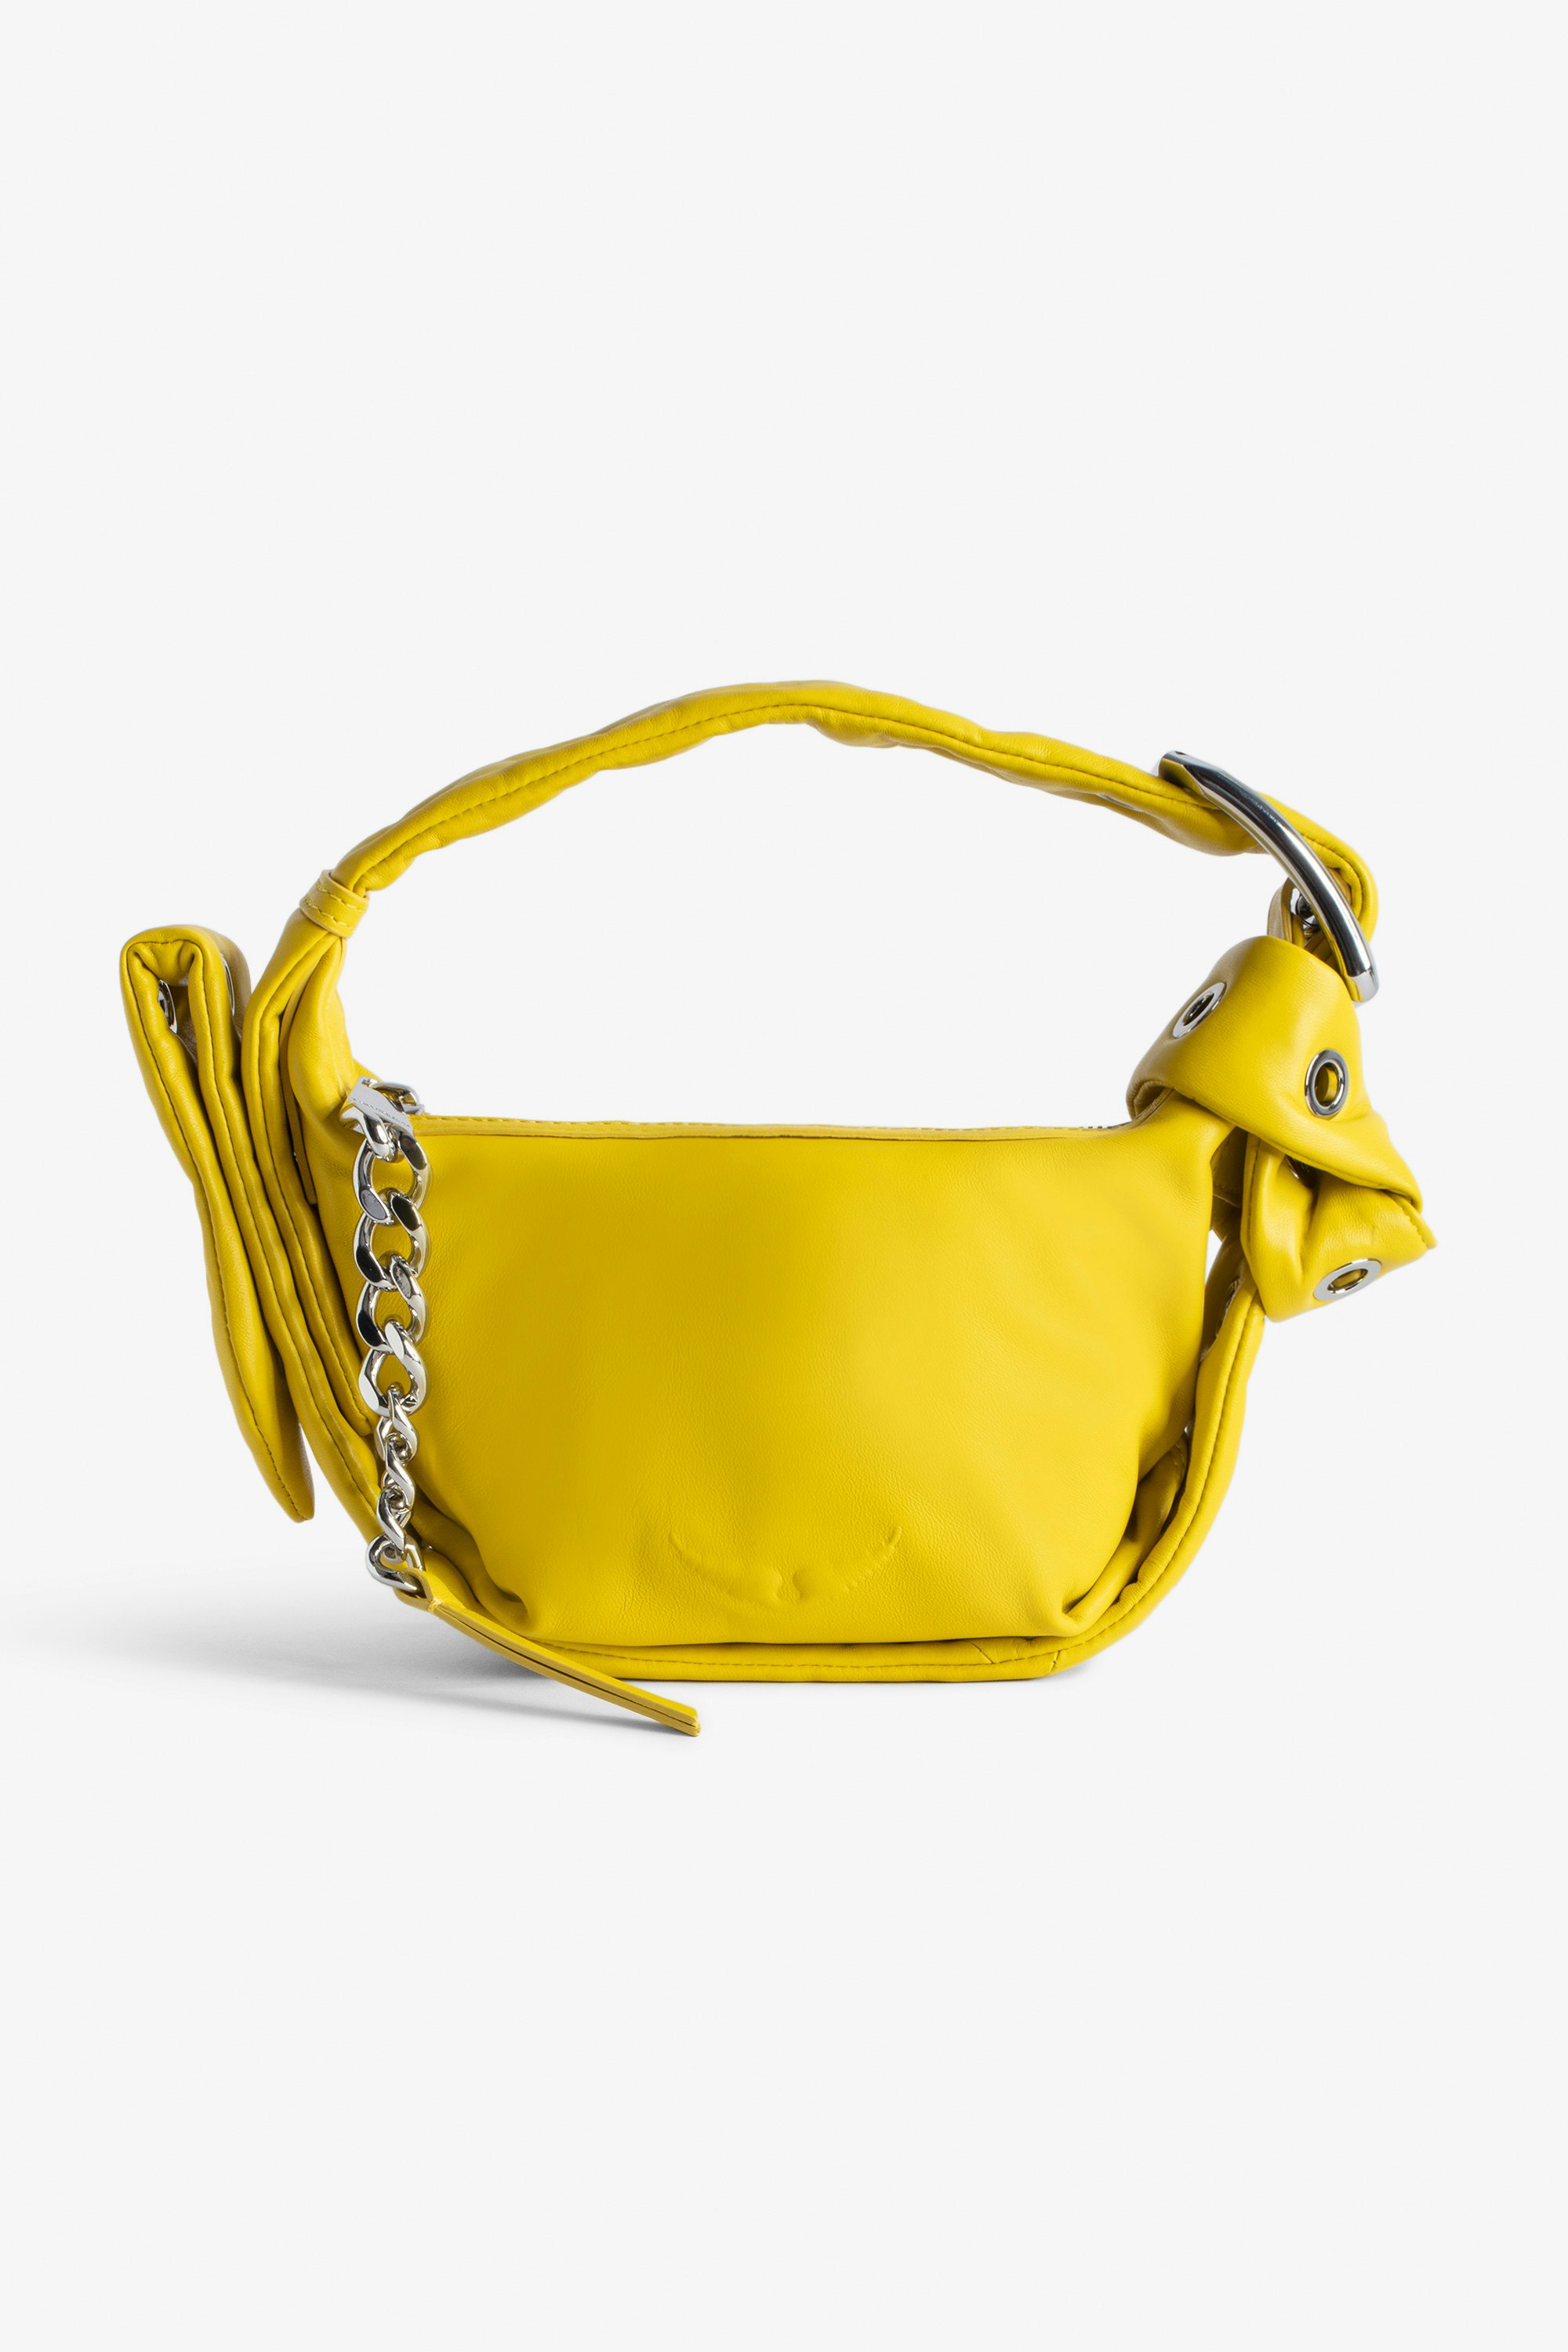 Le Cecilia XS Obsession Bag Women’s small yellow smooth leather bag with shoulder strap and metal C buckle.